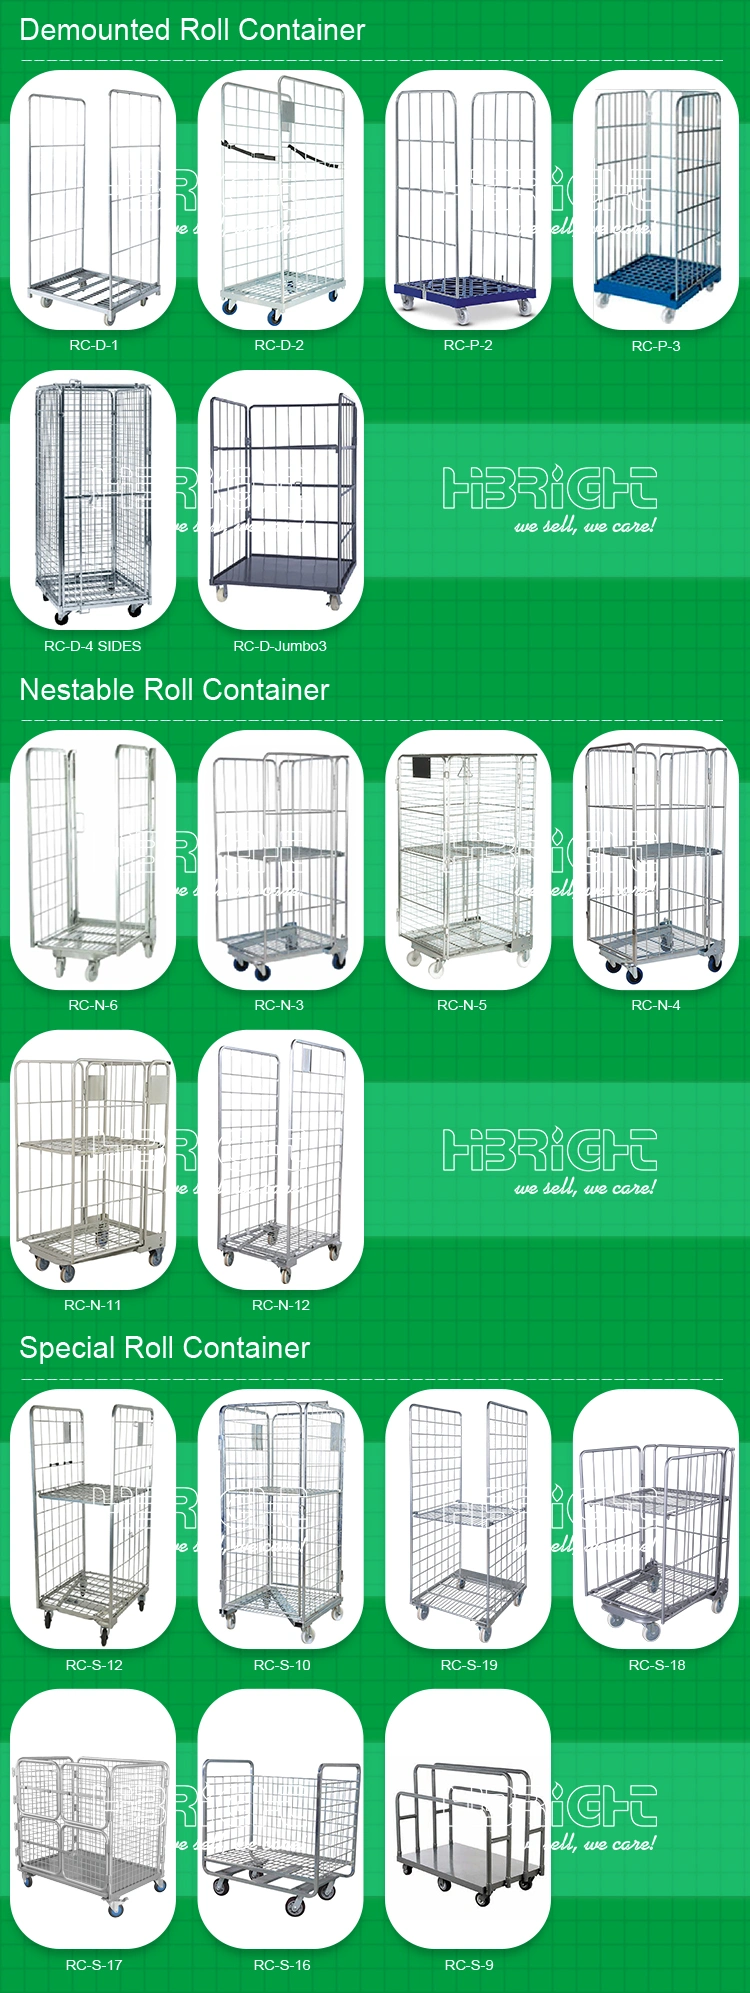 3 Sided Foldable Steel Pallet Rack Container Folding Cage Trolley